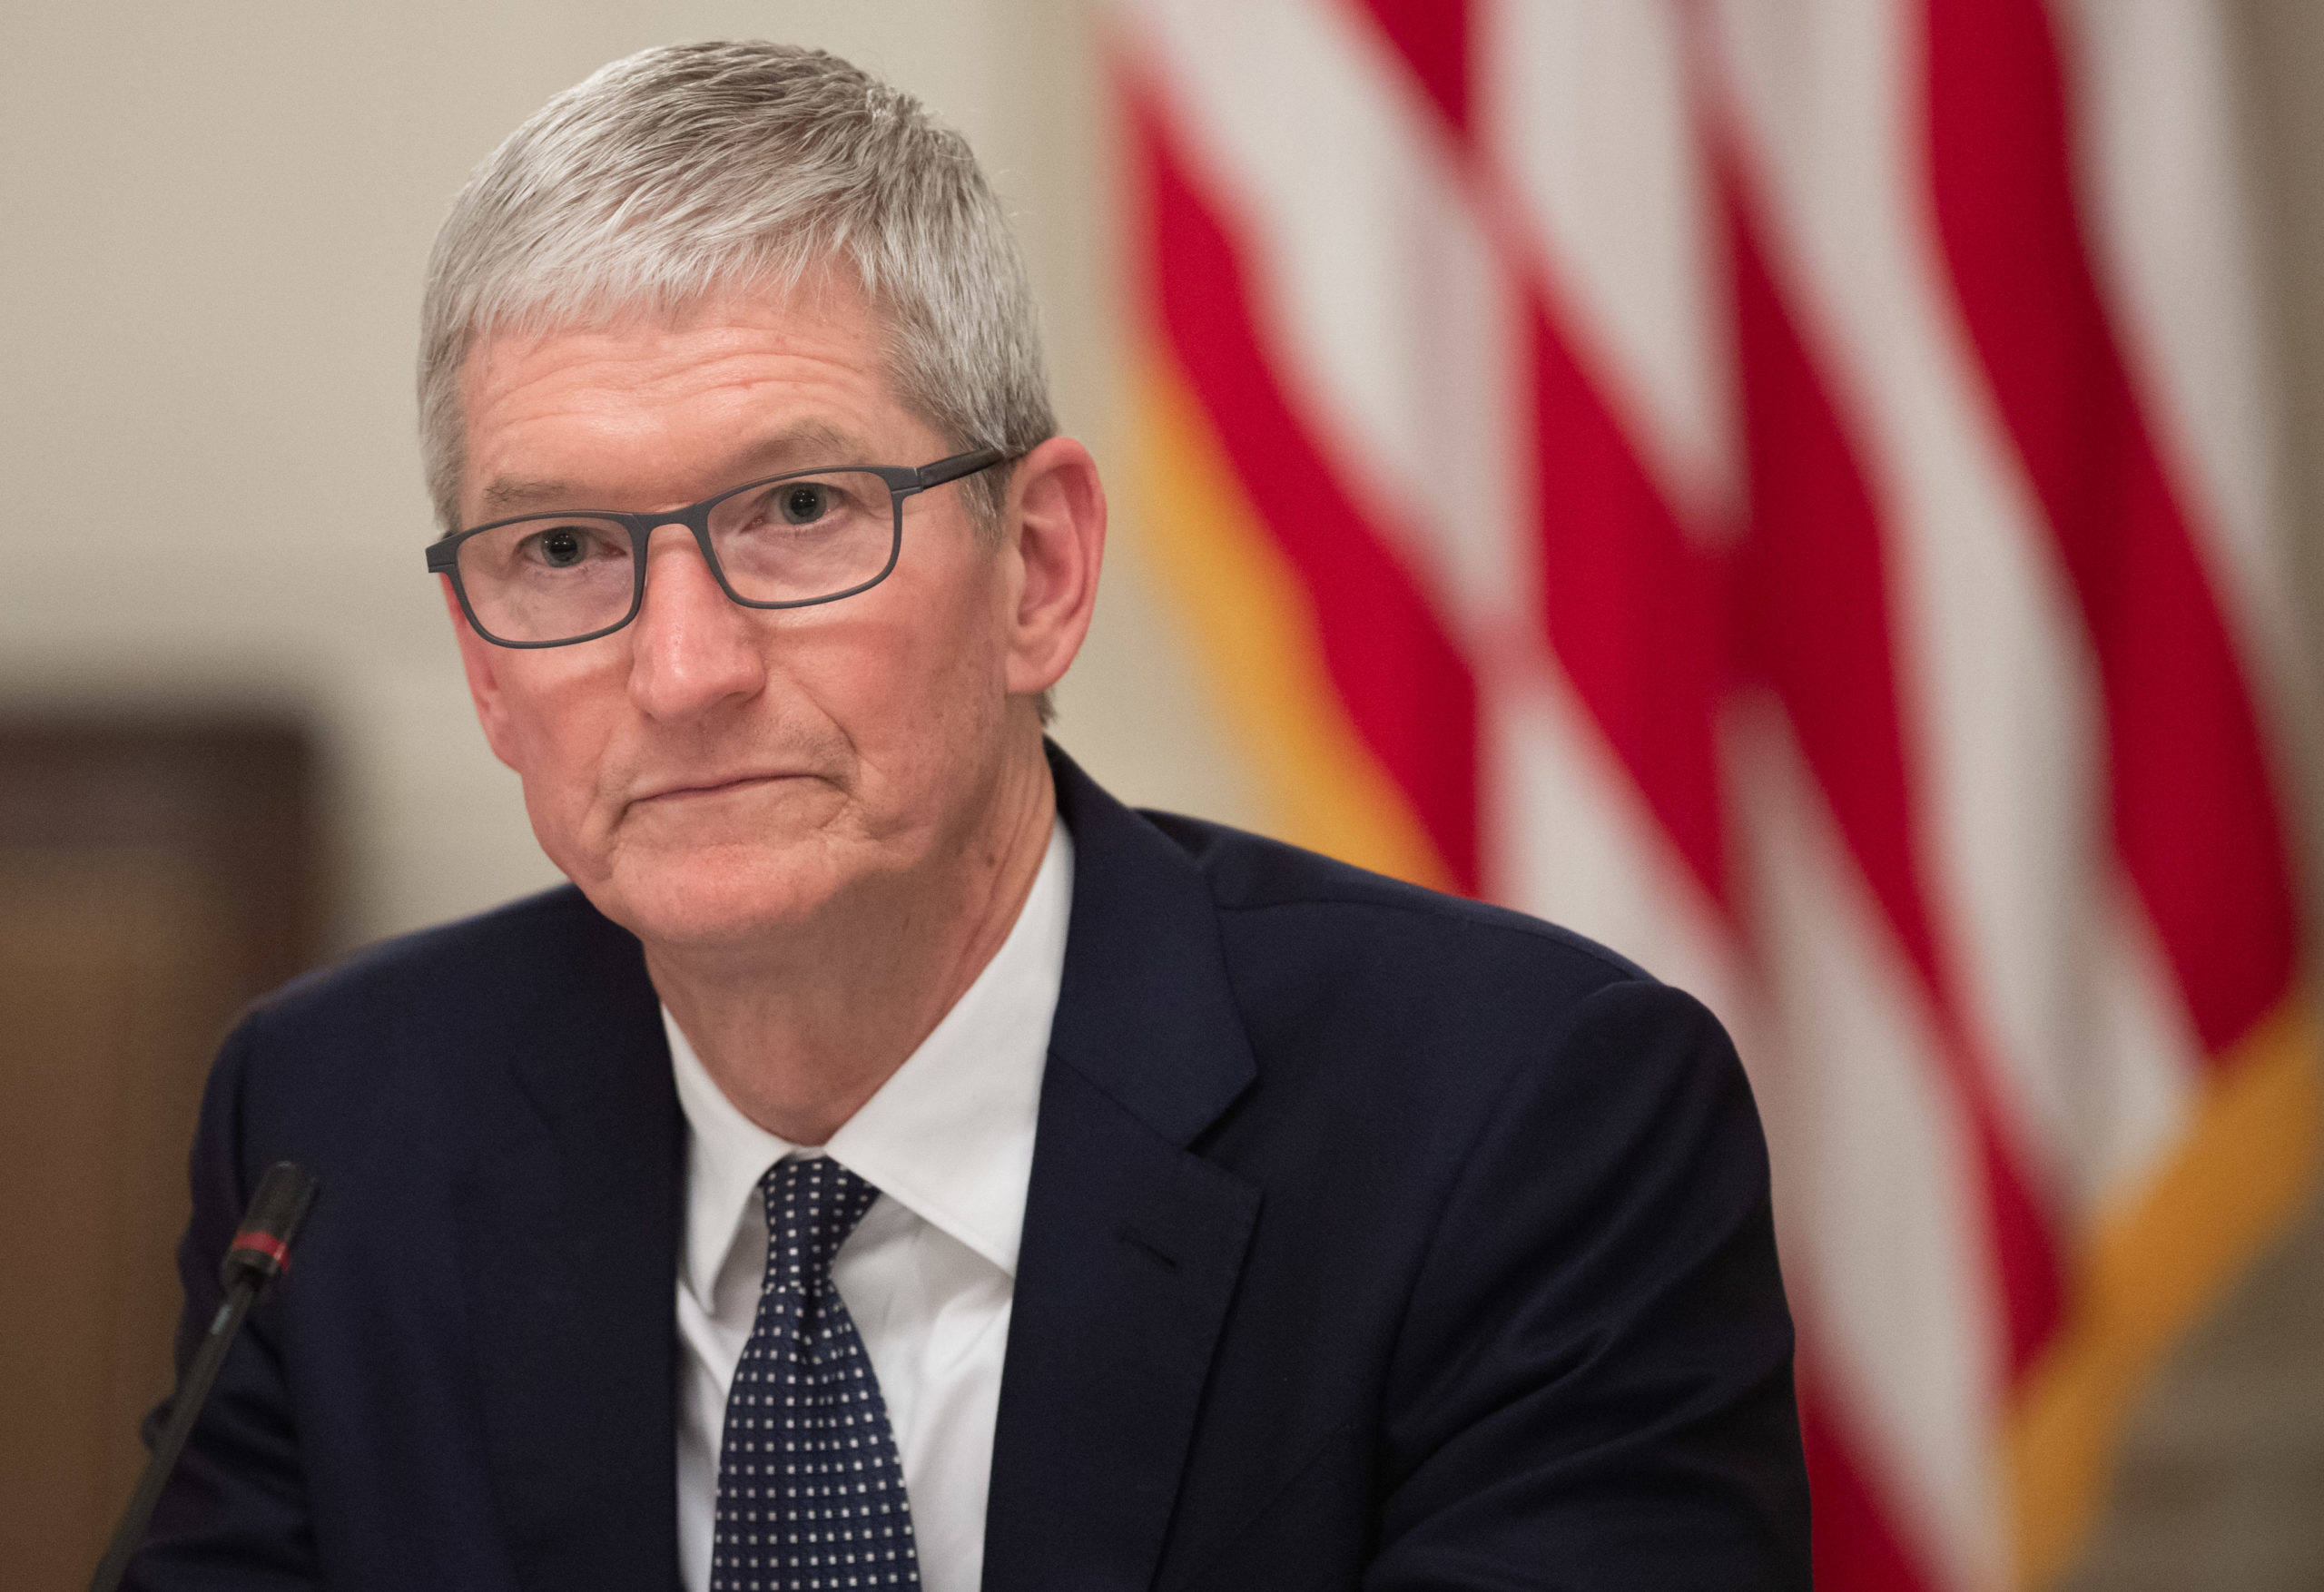 Apple CEO Tim Cook attends the first meeting of the American Workforce Policy Advisory Board with US President Donald Trump in the State Dining Room of the White House in Washington, DC, March 6, 2019. (Photo by SAUL LOEB / AFP) 